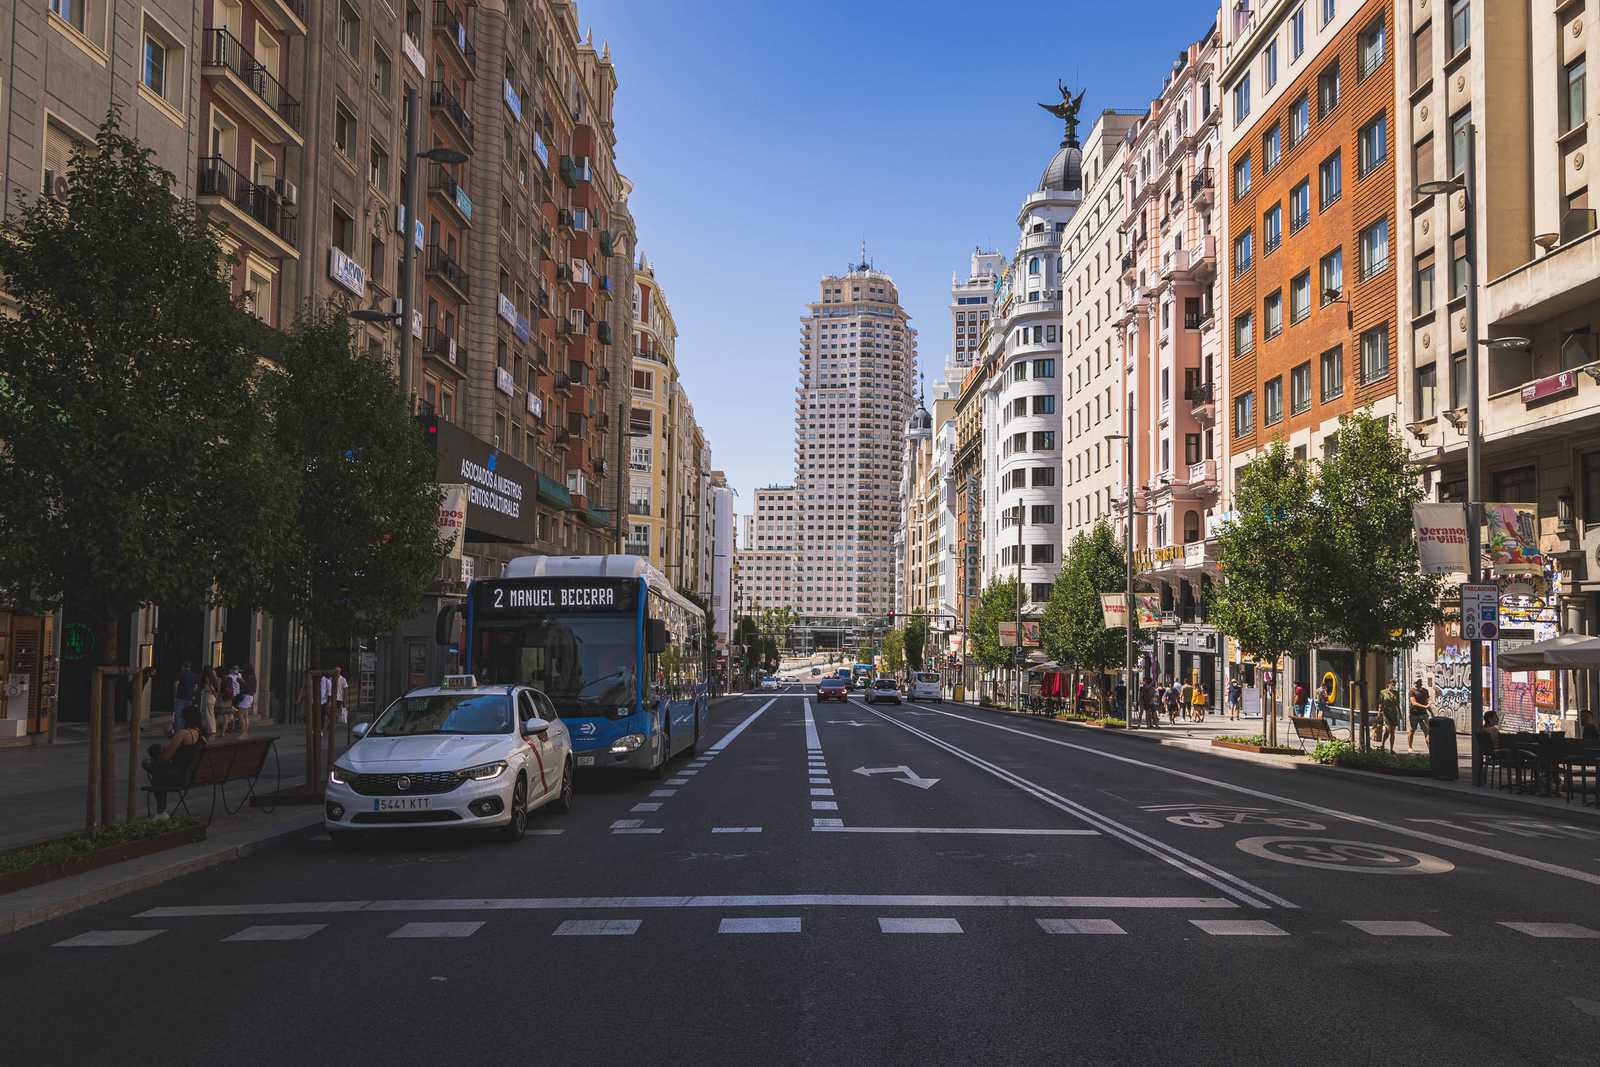 A busy street in the center of Madrid